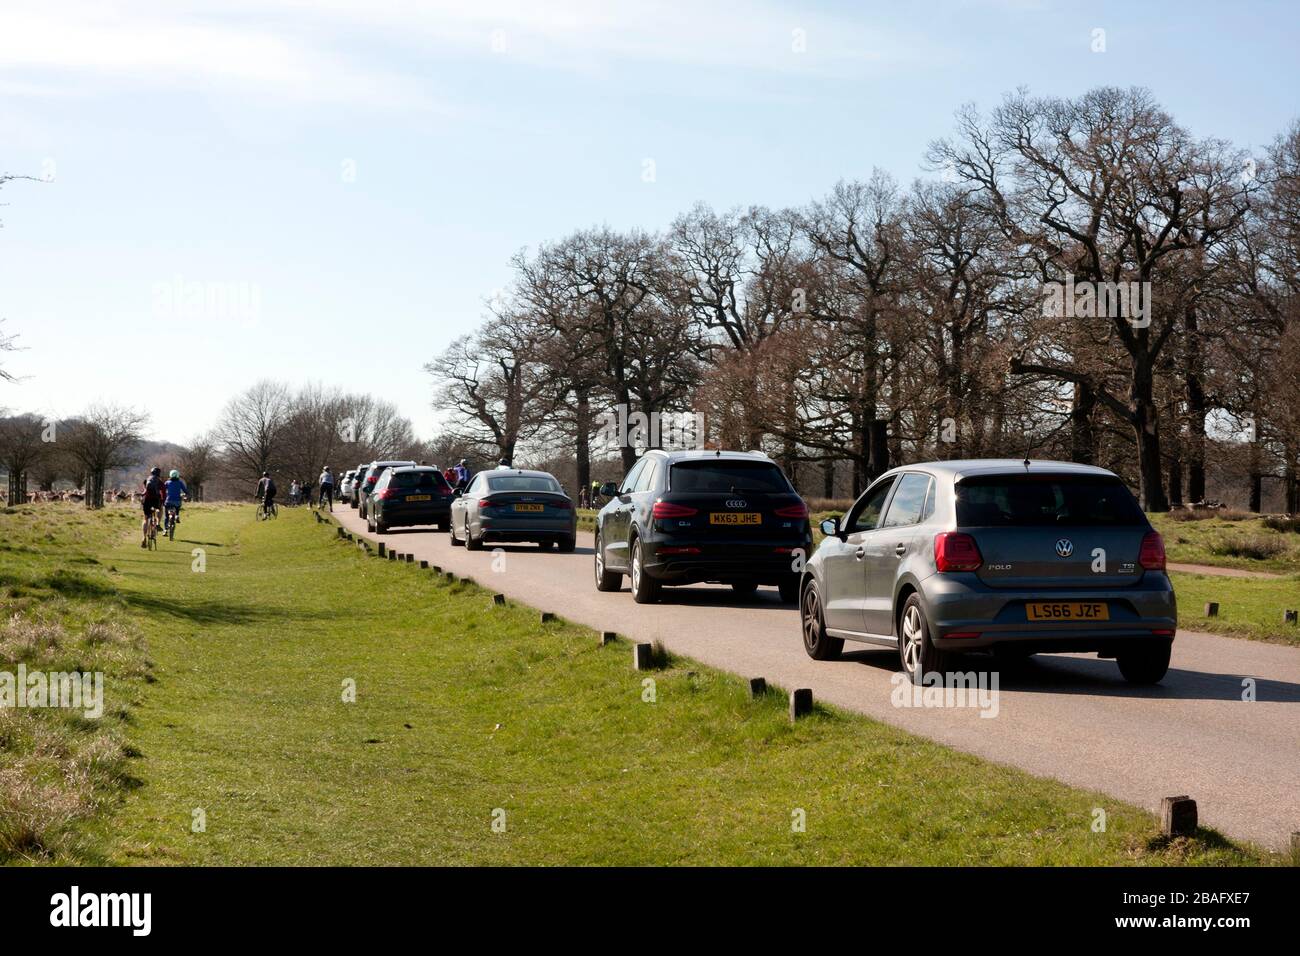 Richmond Park, London, during the coronavirus outbreak 2020, cars lined up just before gates closed on Mothers Day Stock Photo